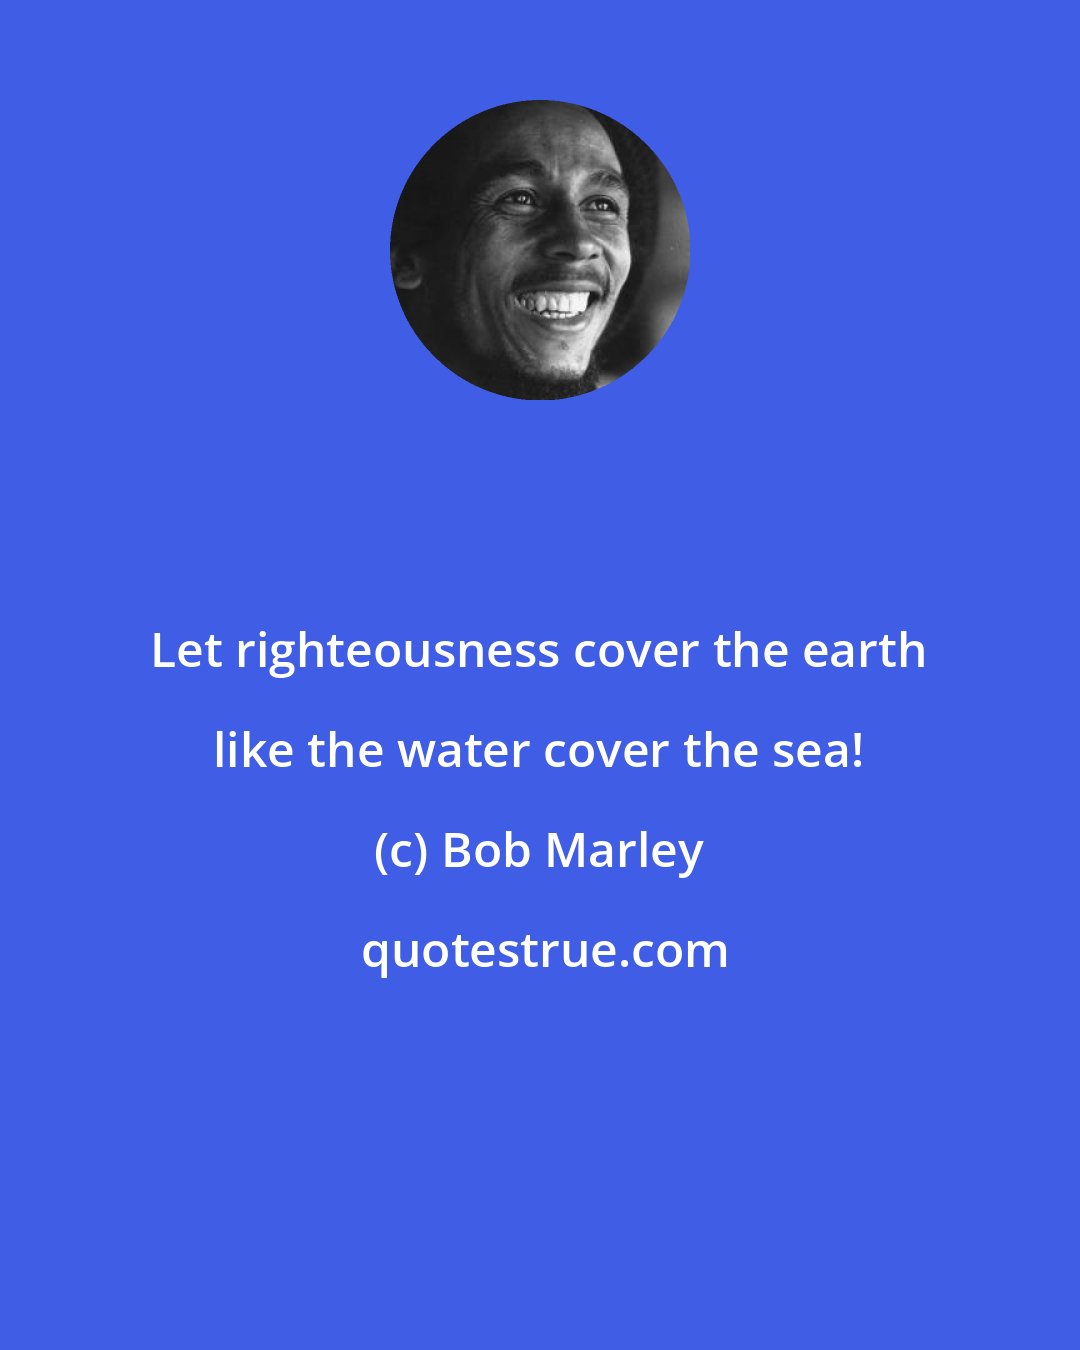 Bob Marley: Let righteousness cover the earth like the water cover the sea!